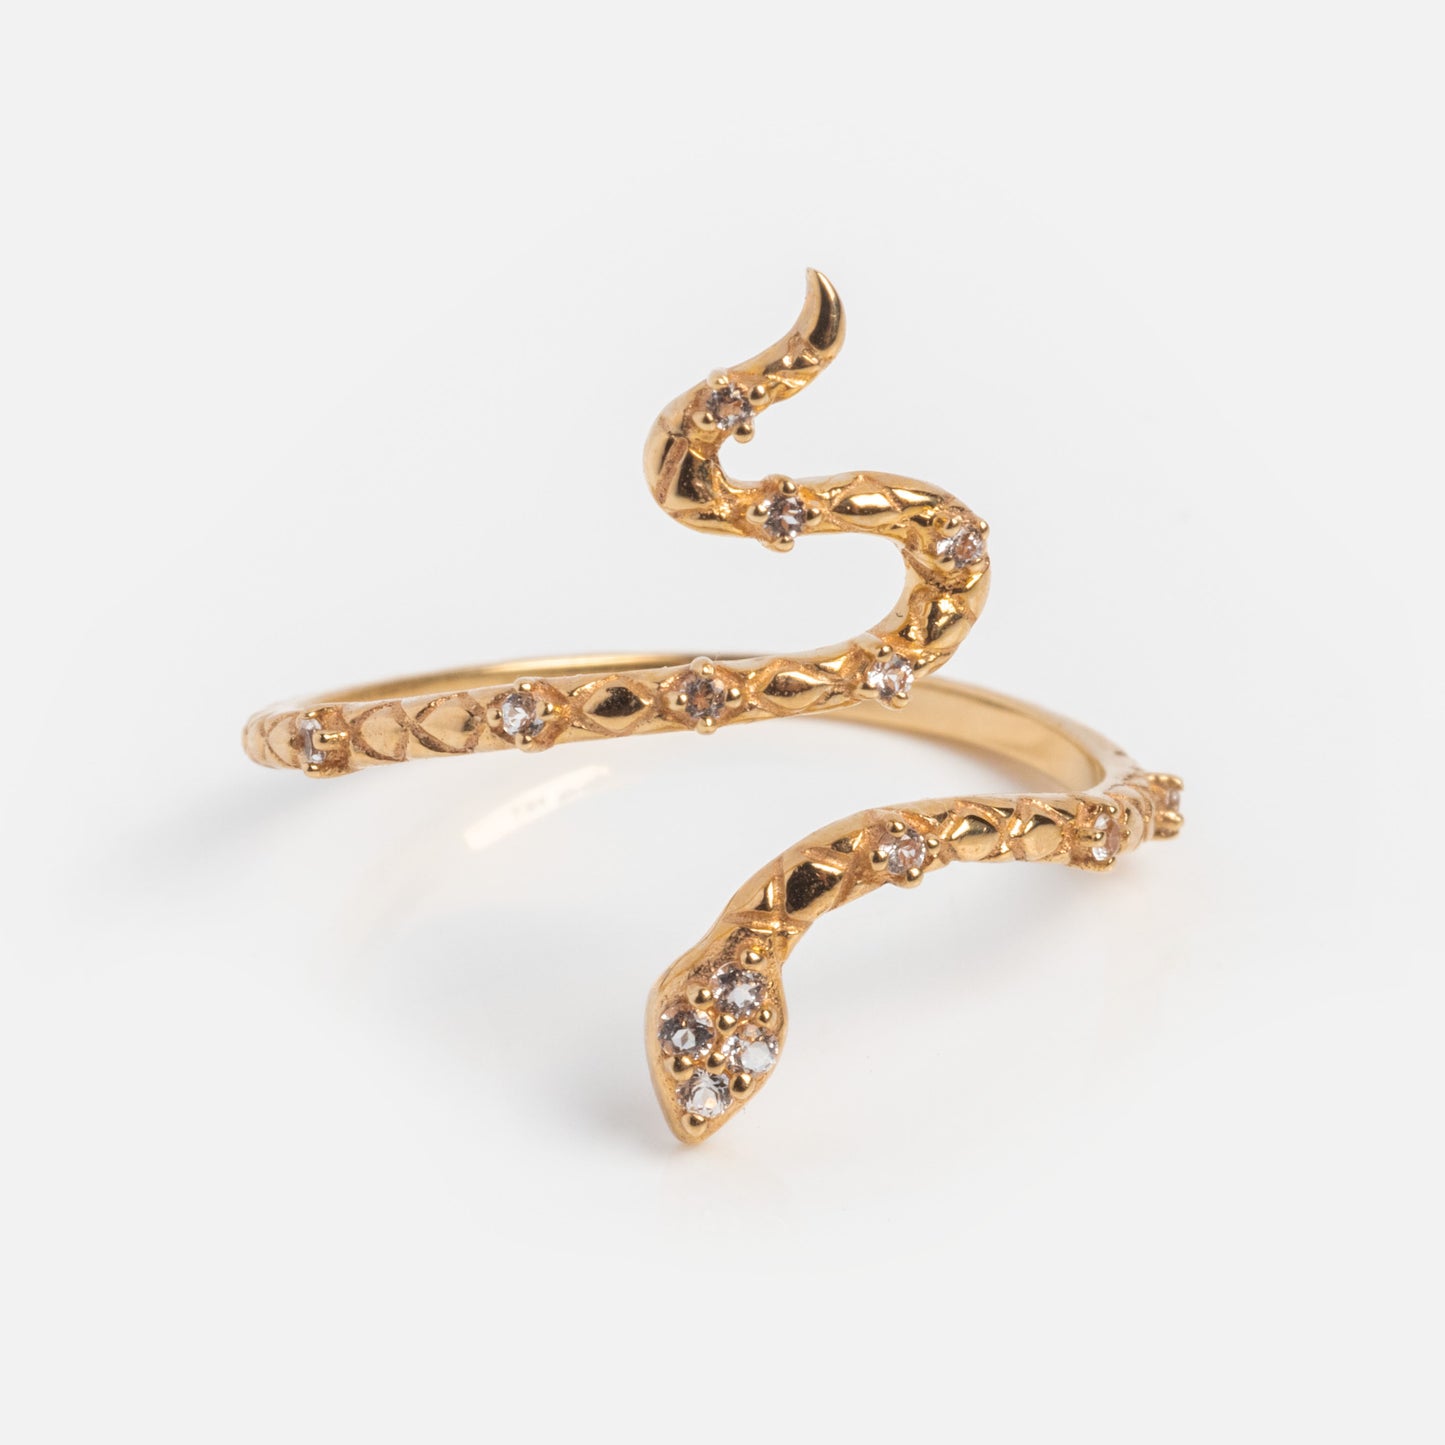 Solid Gold Wrapped Snake Ring for Wisdom